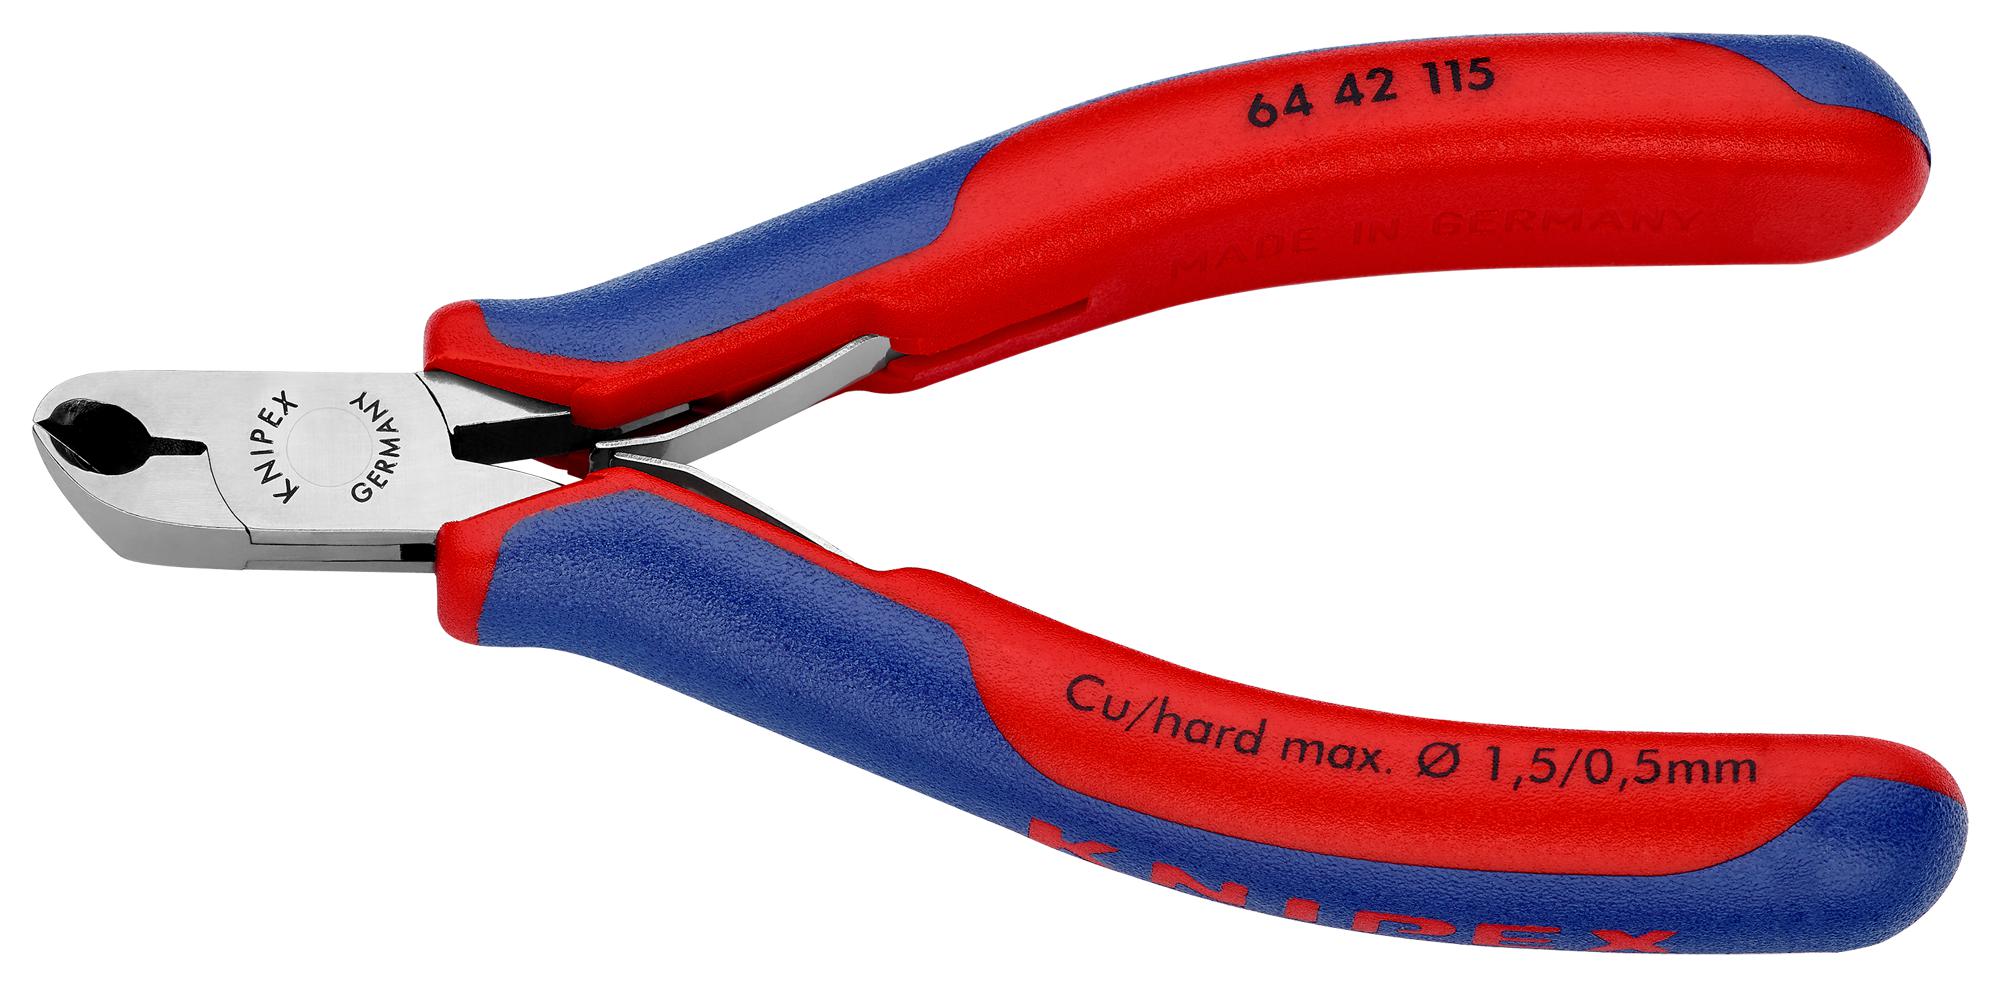 64 42 115 CUTTER, OBLIQUE, 115MM KNIPEX